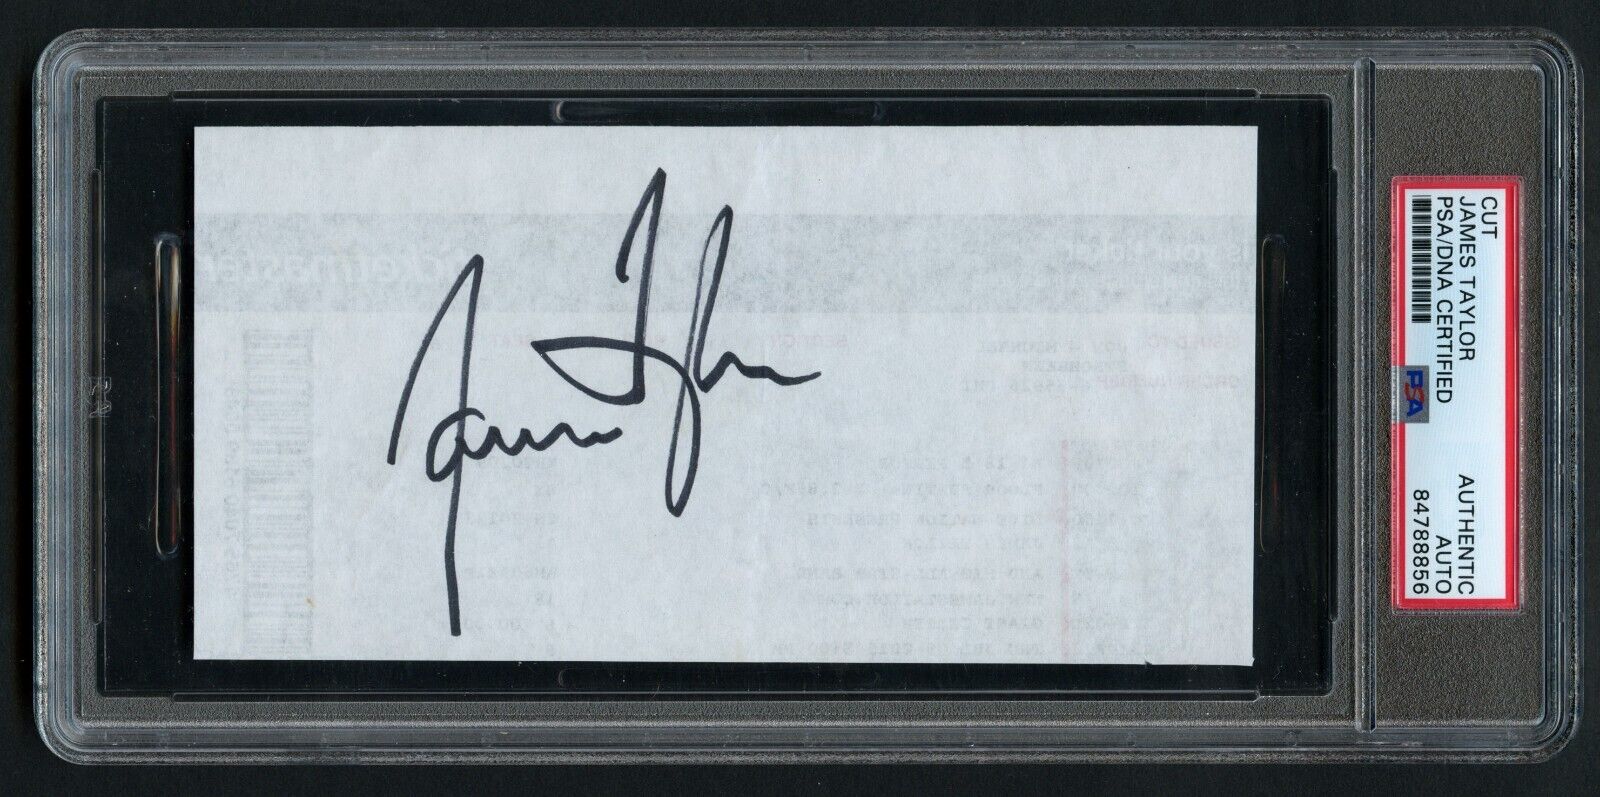 James Taylor signed autograph 3x6 cut backside Ticketmaster Printed Ticket PSA